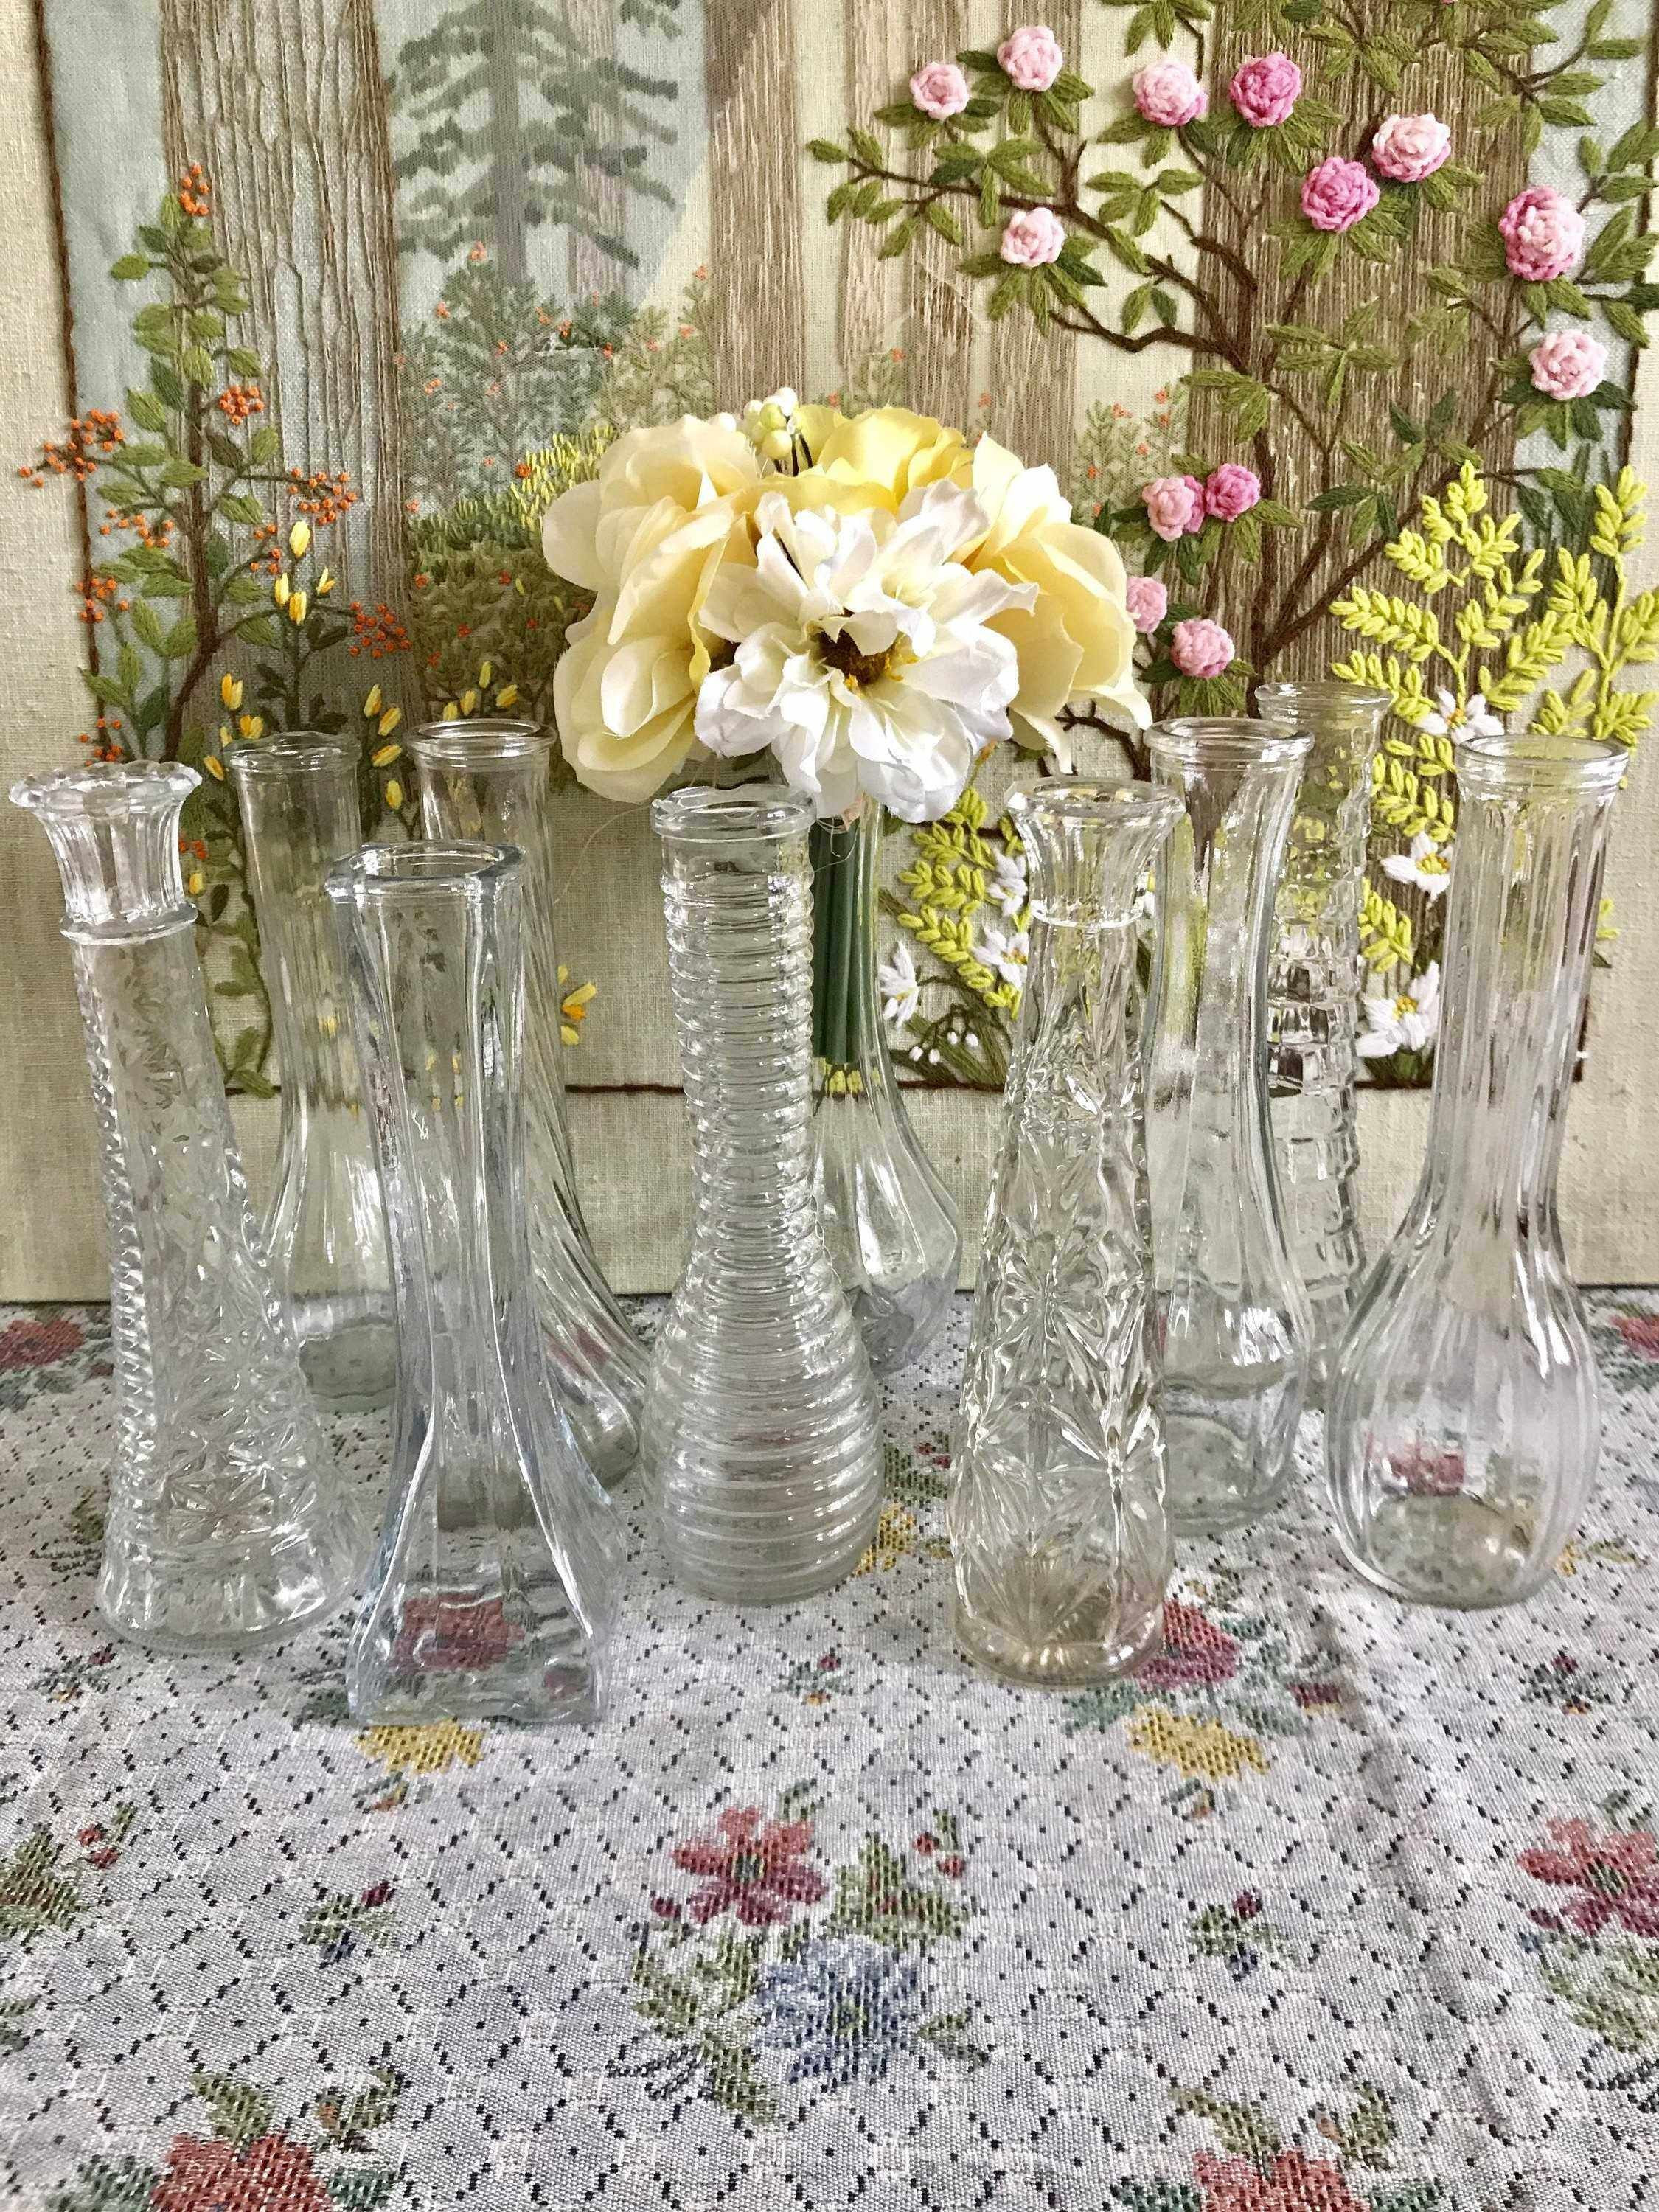 13 Recommended Cut Crystal Vase 2024 free download cut crystal vase of cut glass vase fresh new winter wedding decorations creative winter pertaining to cut glass vase fresh new winter wedding decorations creative winter wedding ideas winter